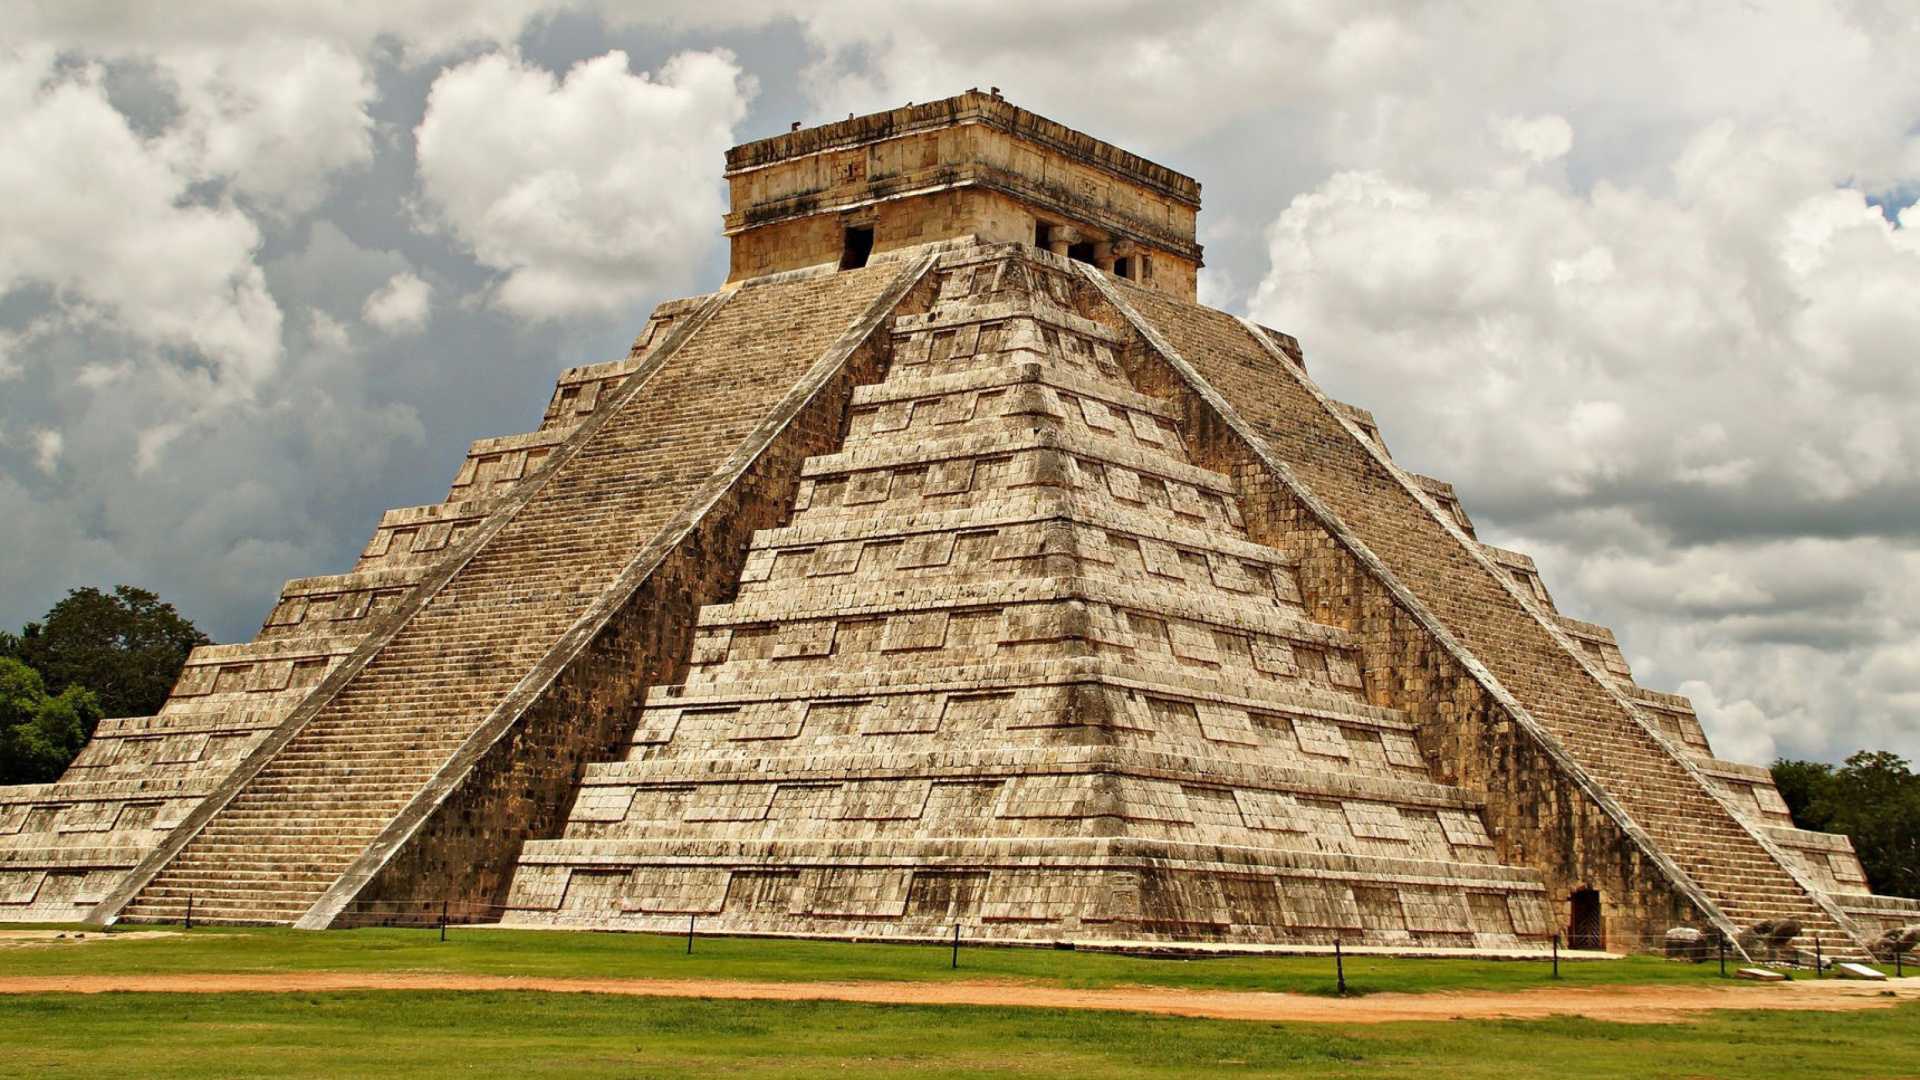 One of the 7 Wonders of the World Chichen Itza Pyramid wallpaper 1920x1080